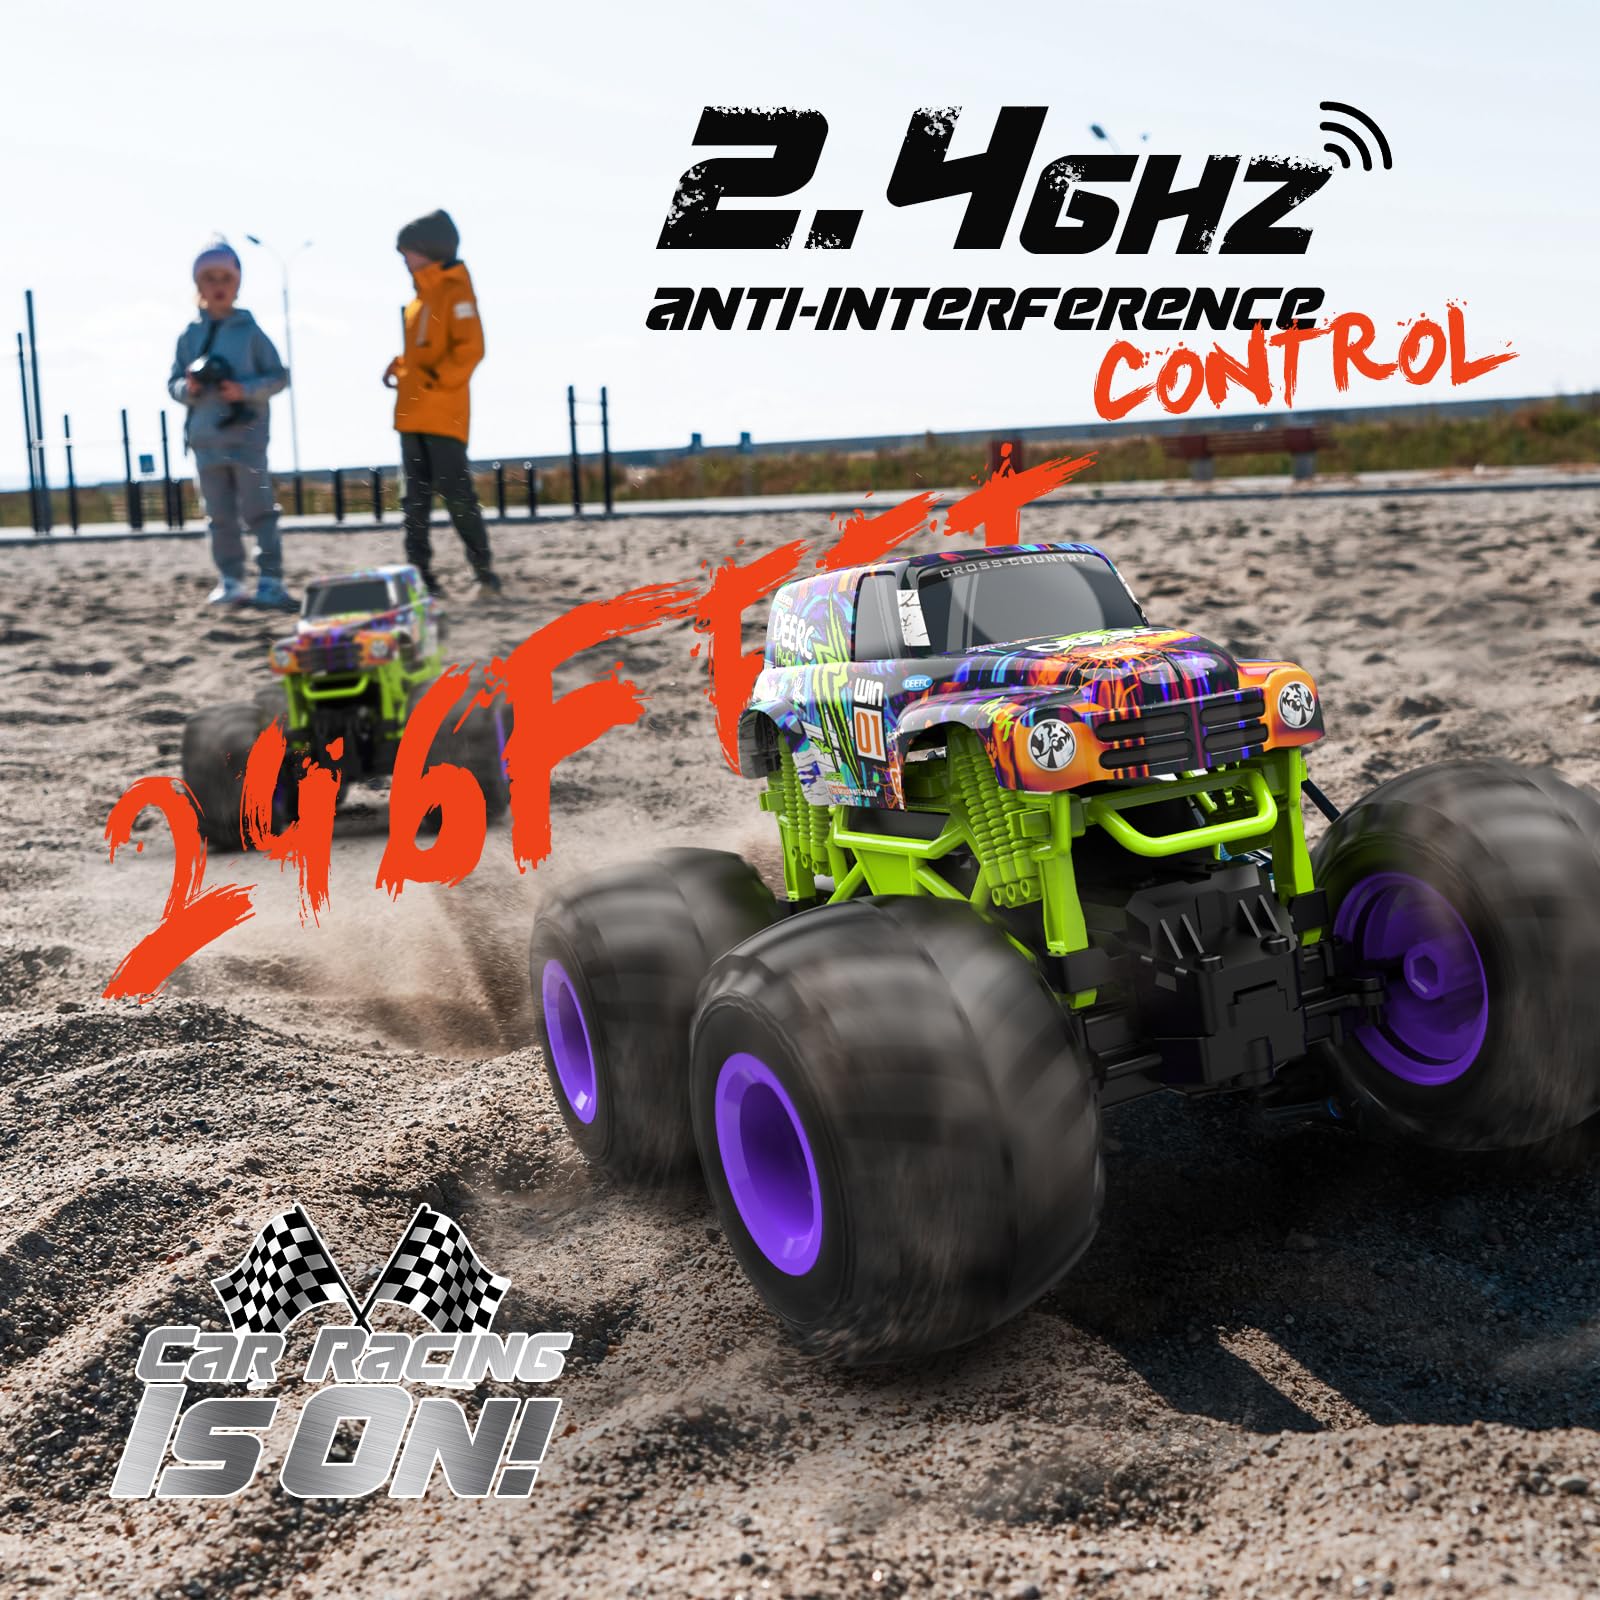 DEERC All Terrain Remote Control Monster Truck Toy,1:16 Scale RC Car for Boys,2.4Ghz High Speed Electric Vehicle,Big Foot RC Truck Gift, RTR Crawler for Kids